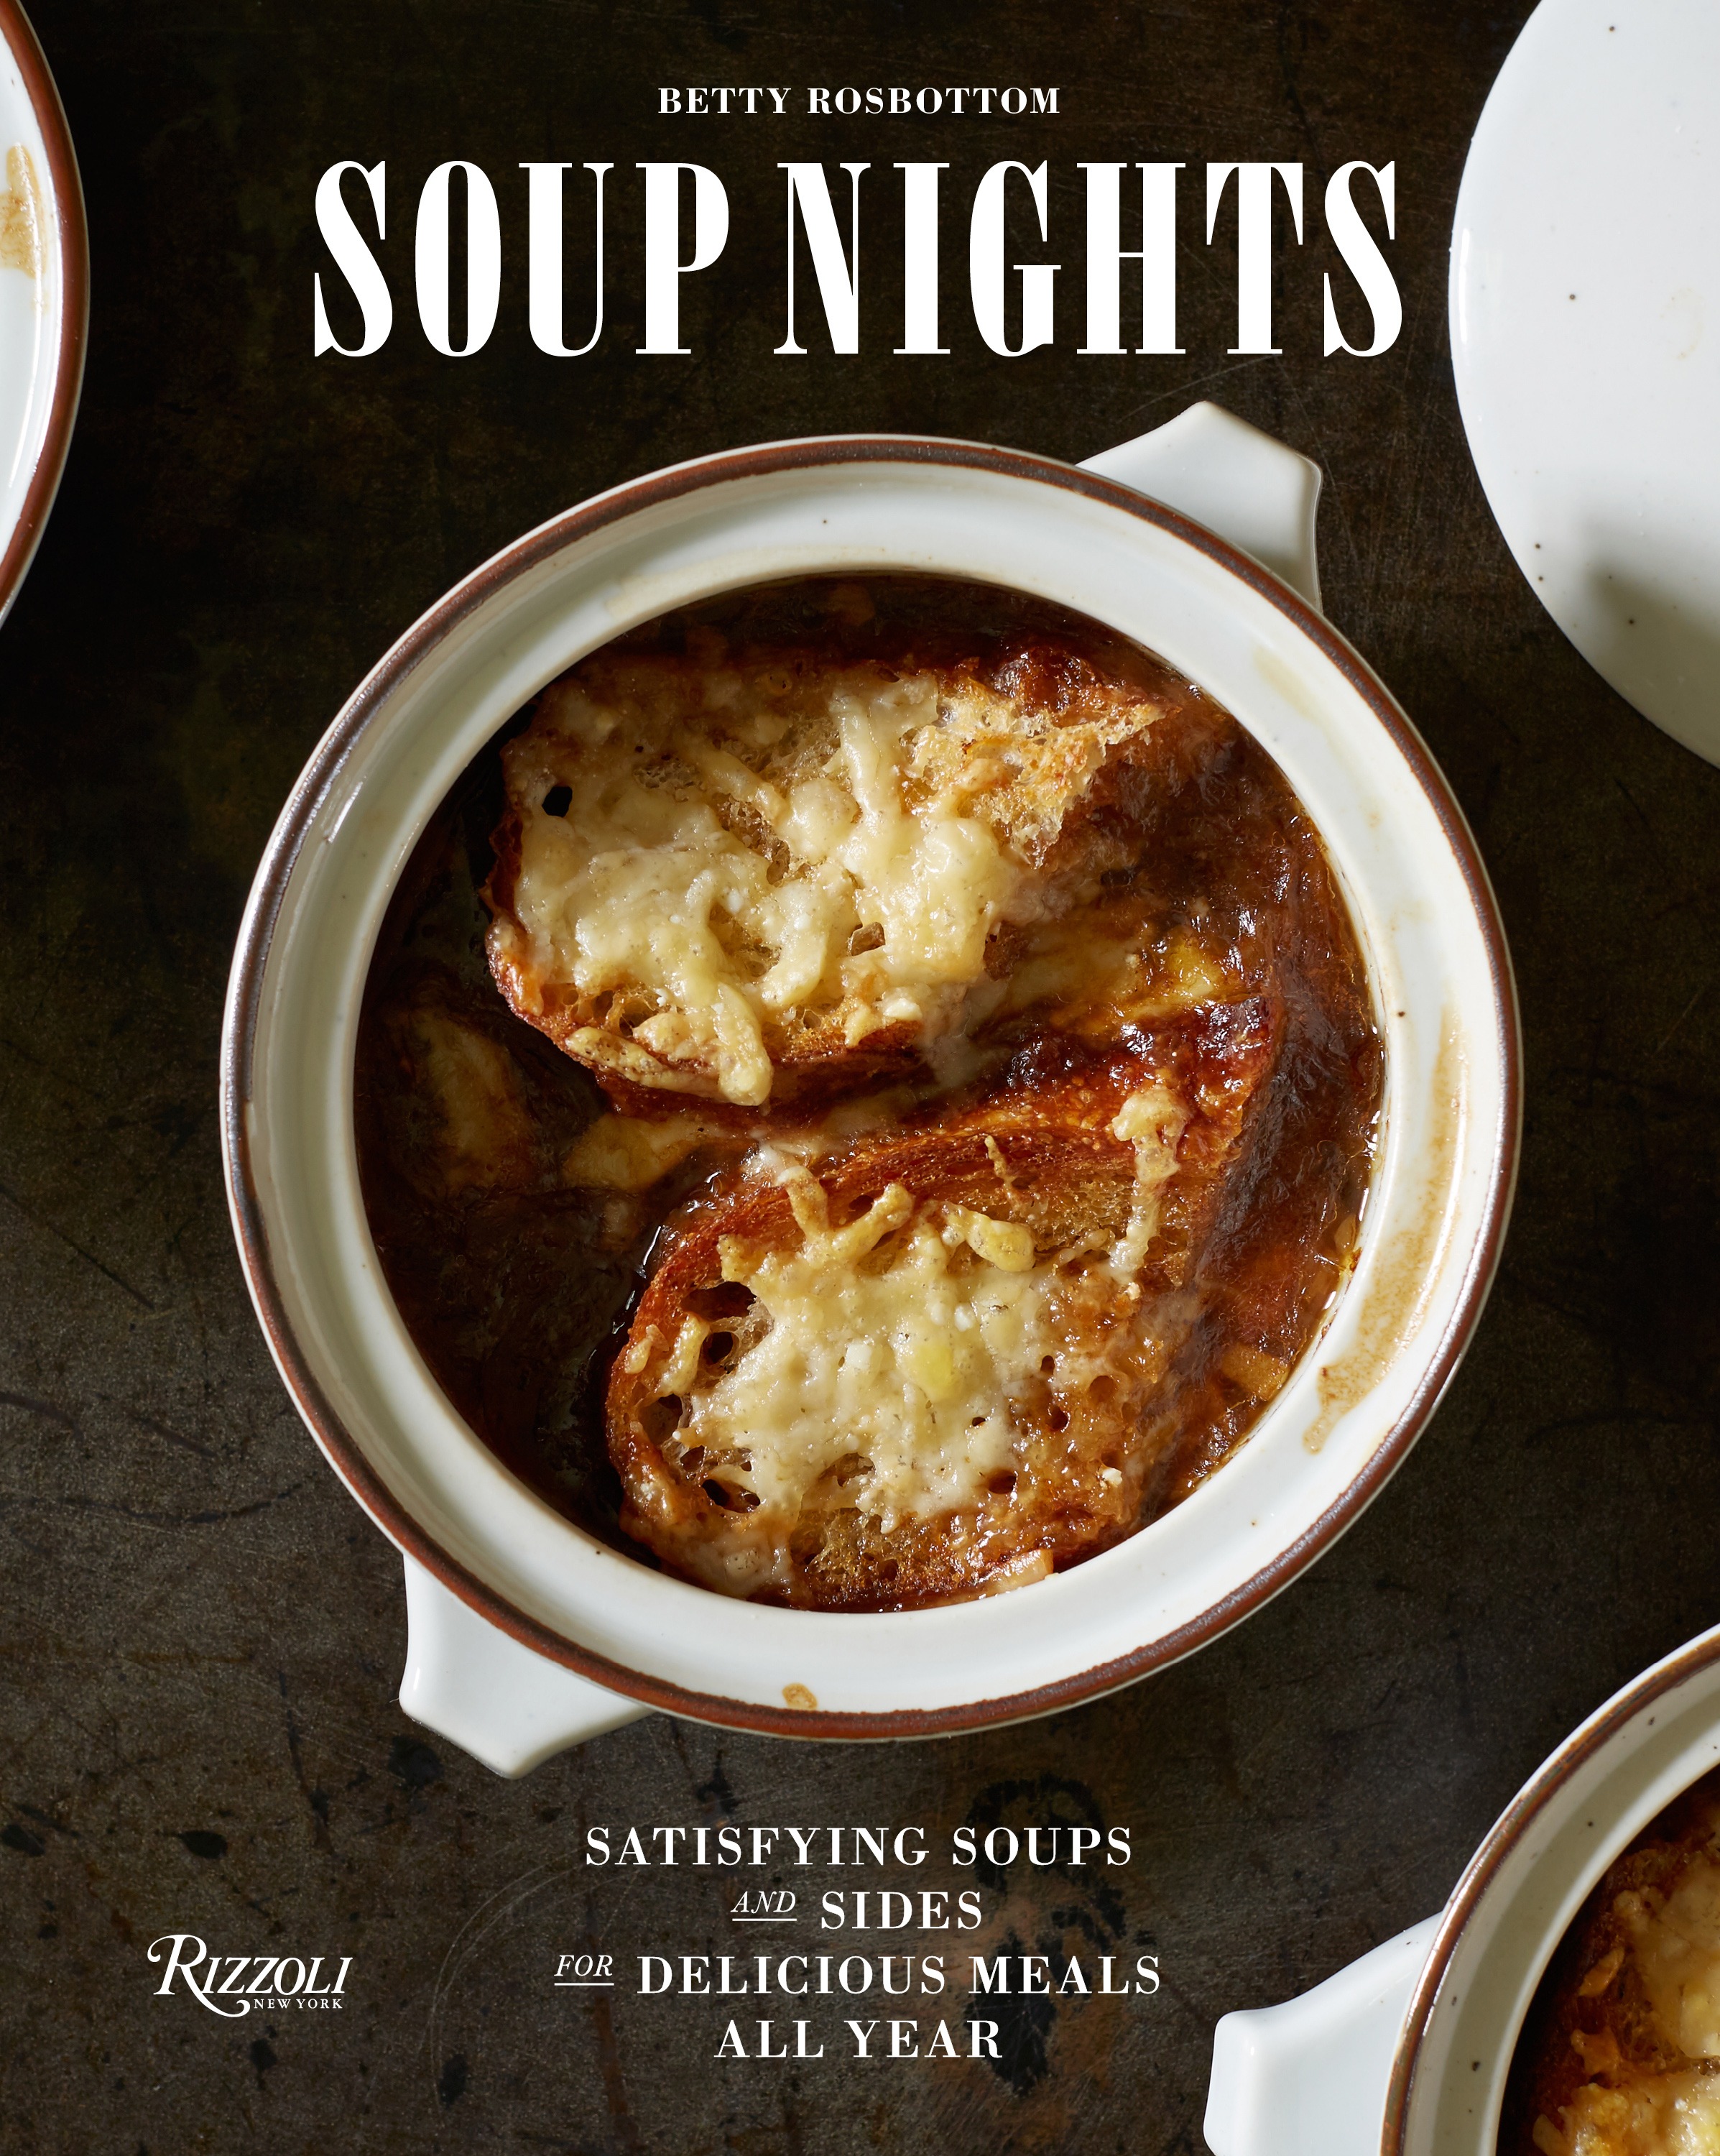 Cookbook cover for Soup Nights by Betty Rosbottom